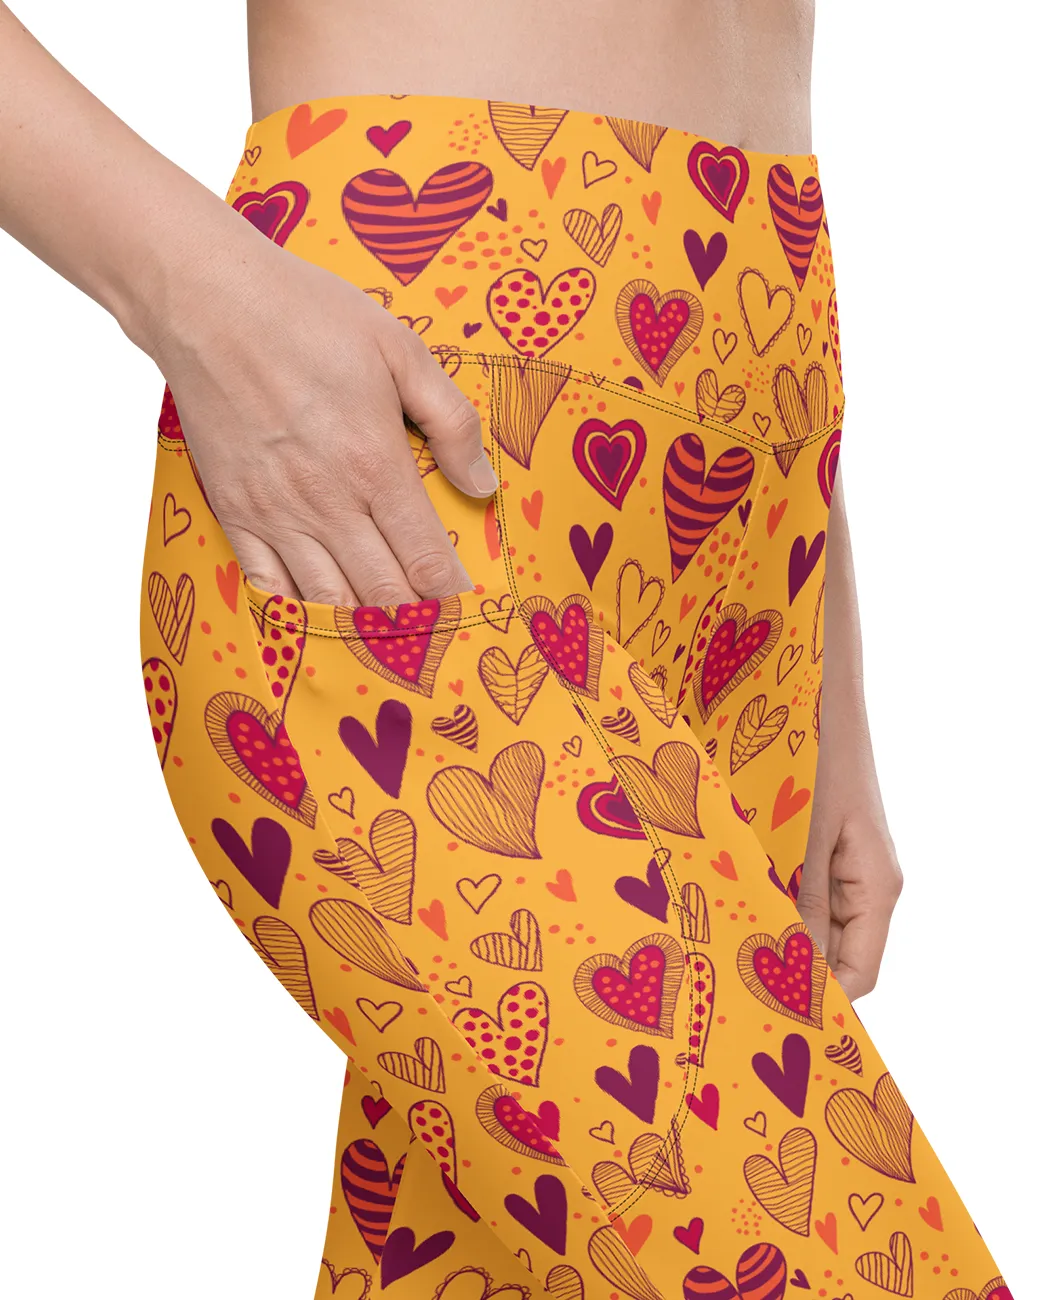 Gold Heart Leggings with Pockets - Sporty Chimp legging, workout gear & more